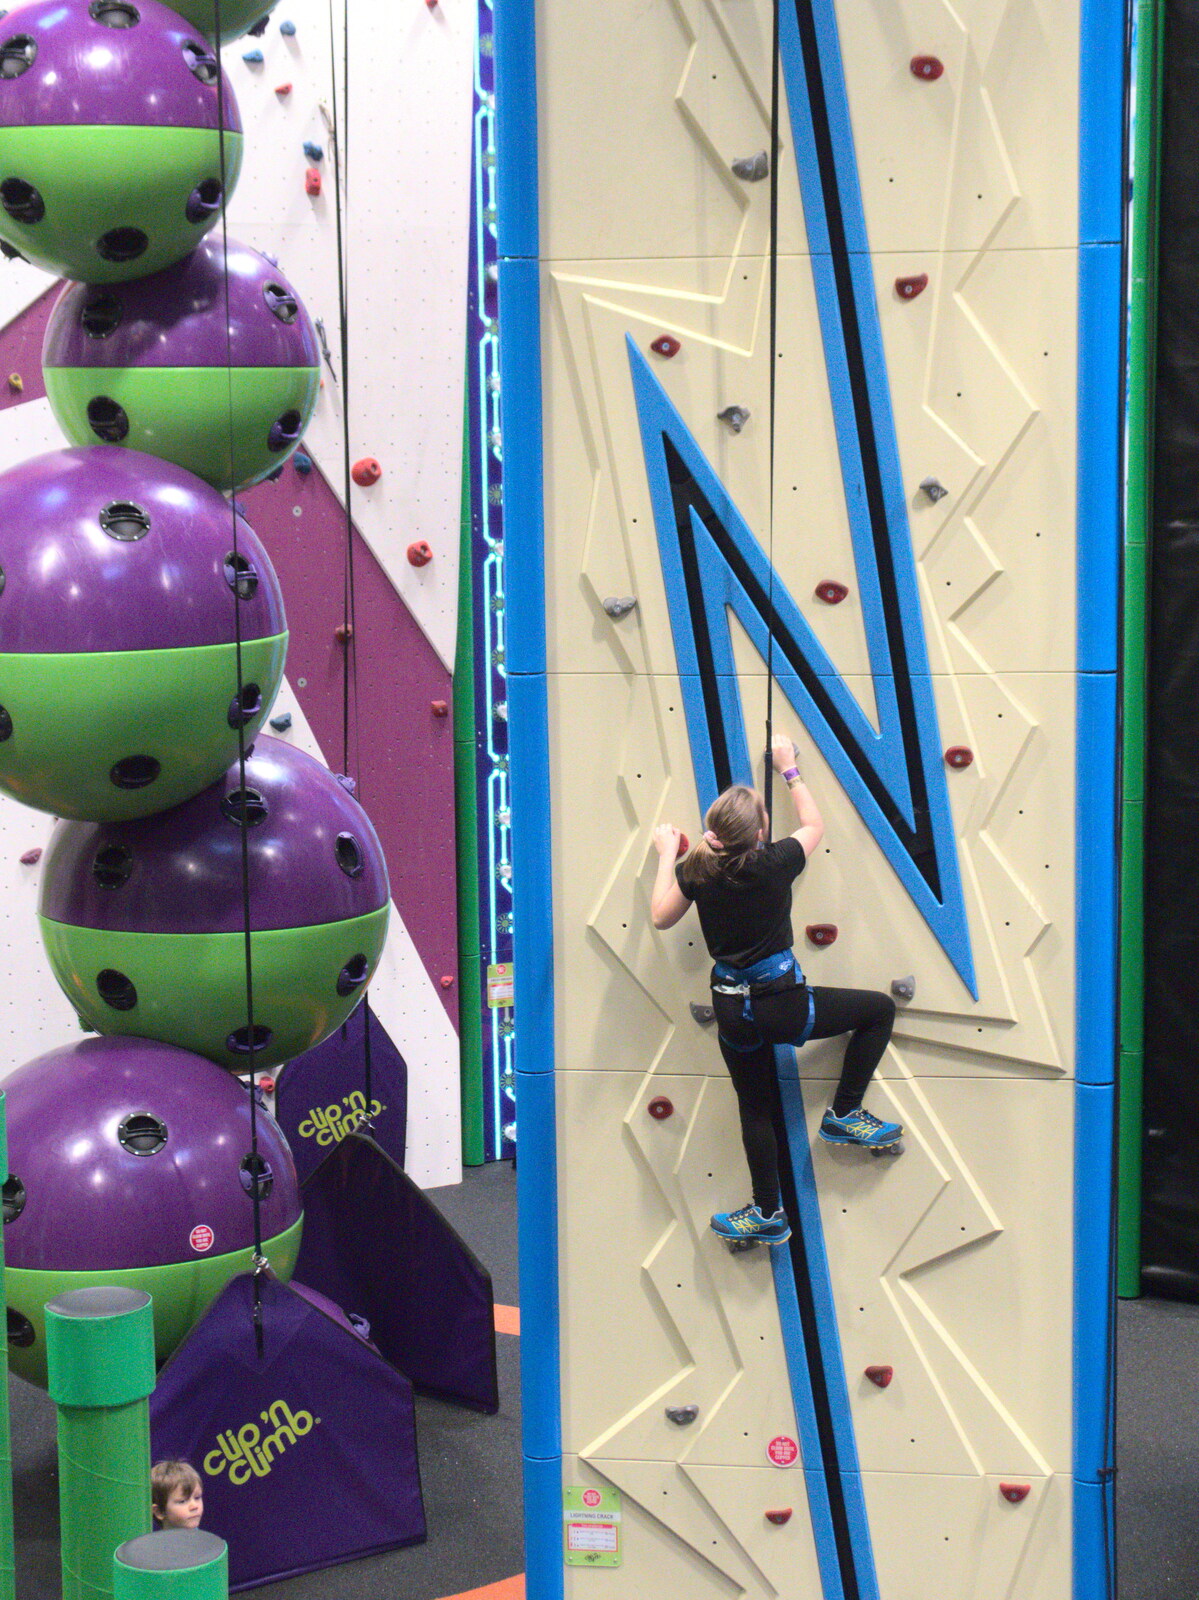 Soph scales another wall from Clip and Climb, The Havens, Ipswich - 15th February 2020